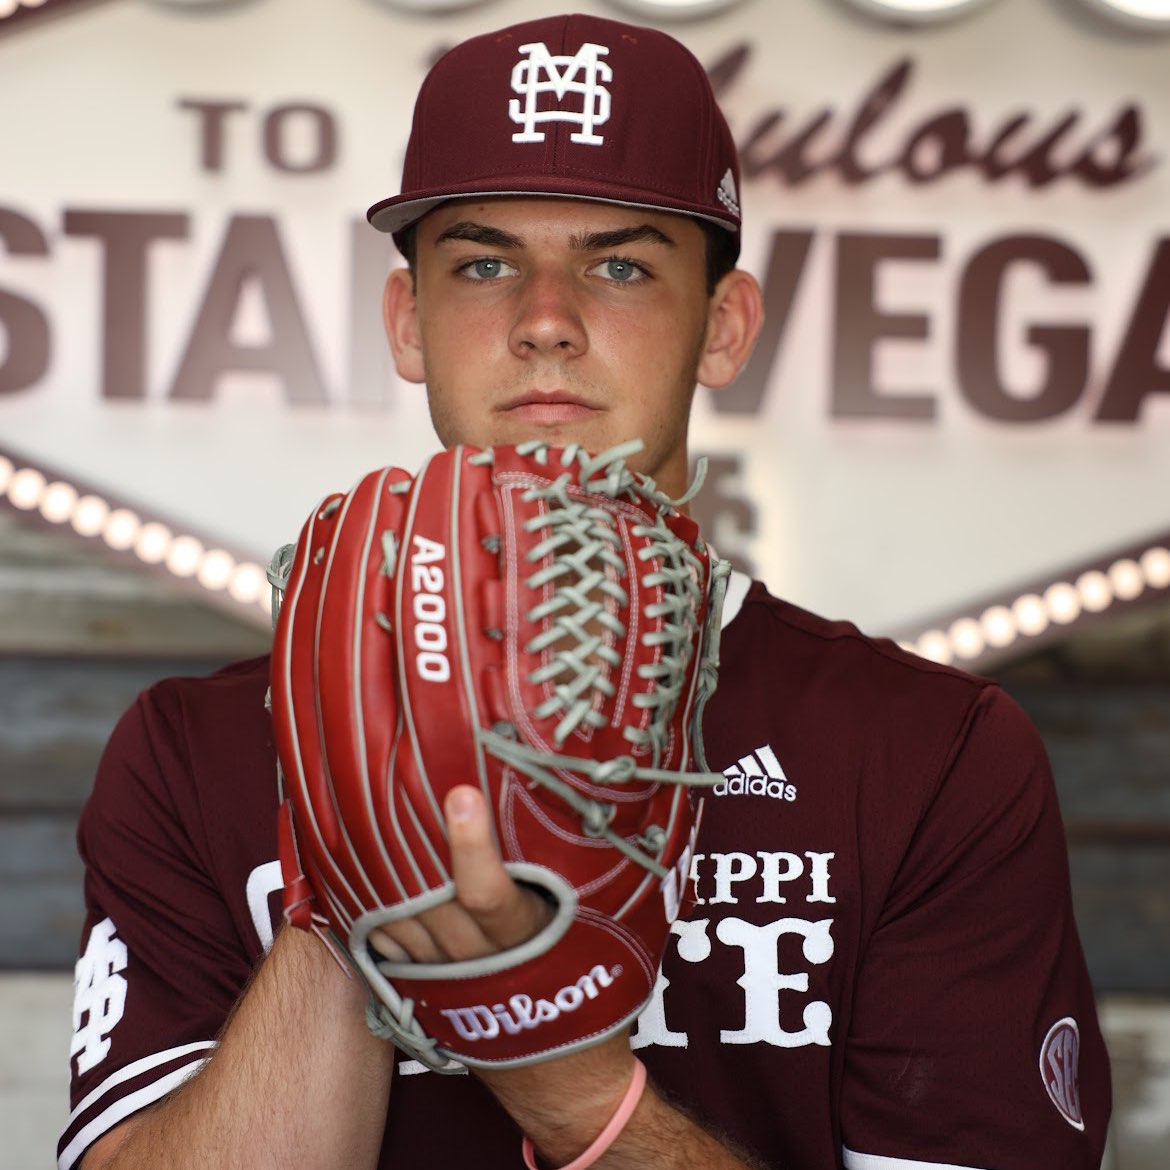 Class of 2023 RHP Jud Files commits to Mississippi State